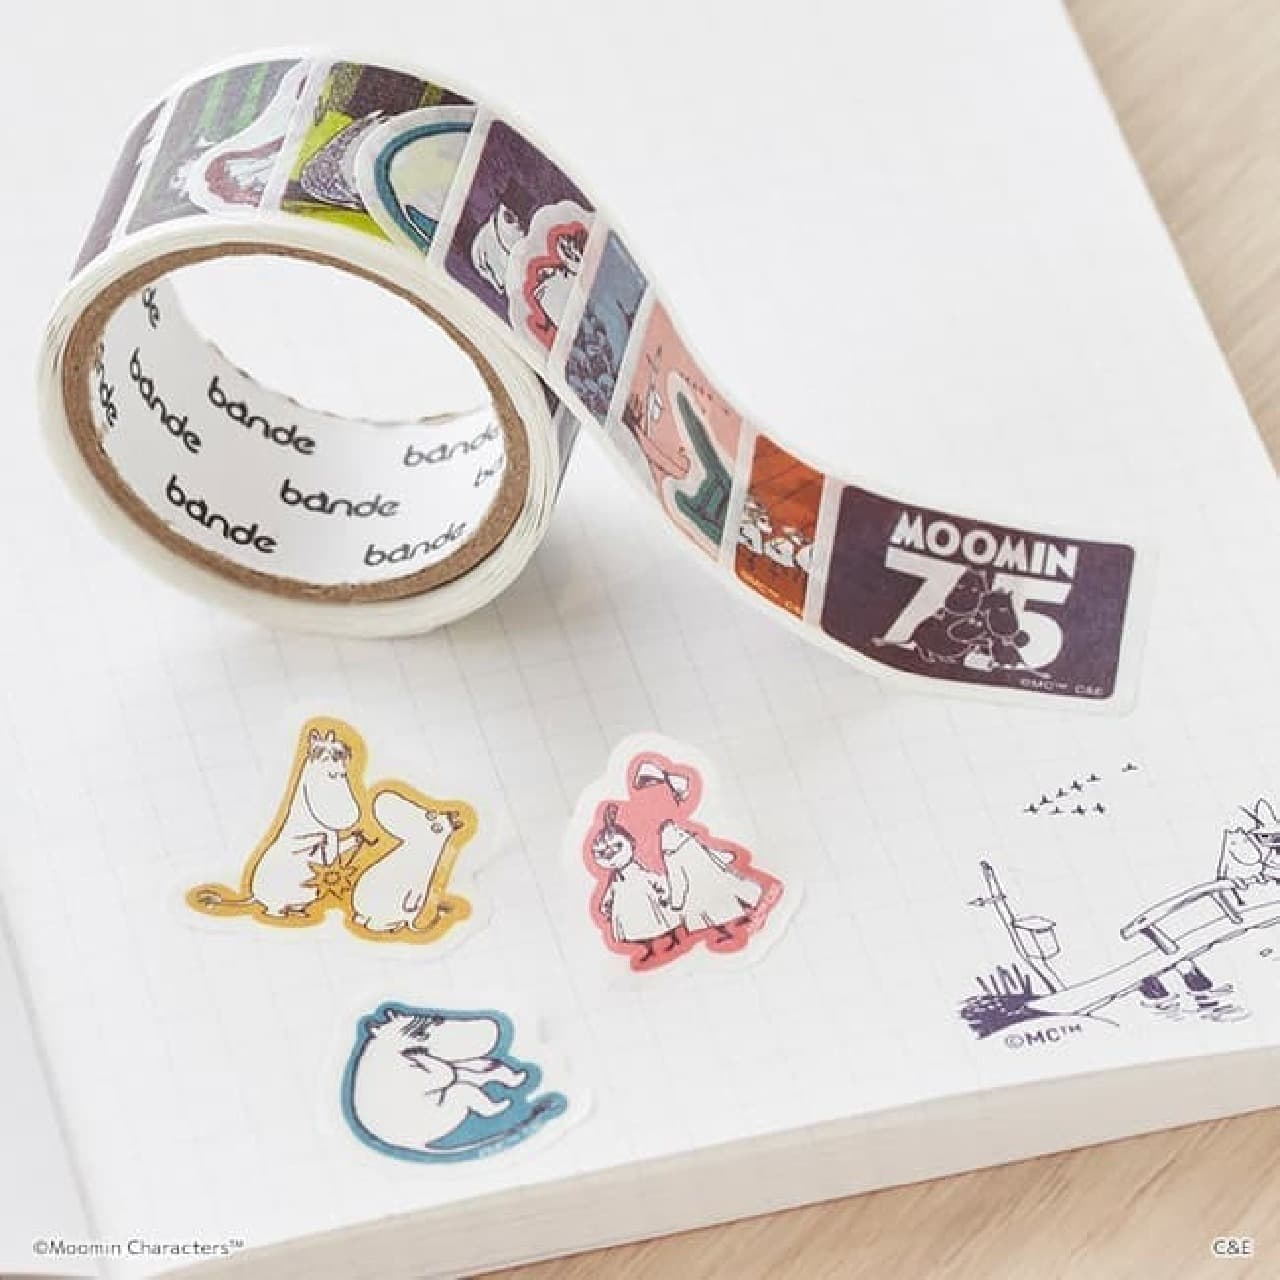 Moomin 75th Anniversary Goods from TSUTAYA --Antibacterial Mask Case and Maste "bande" that can be turned over one by one